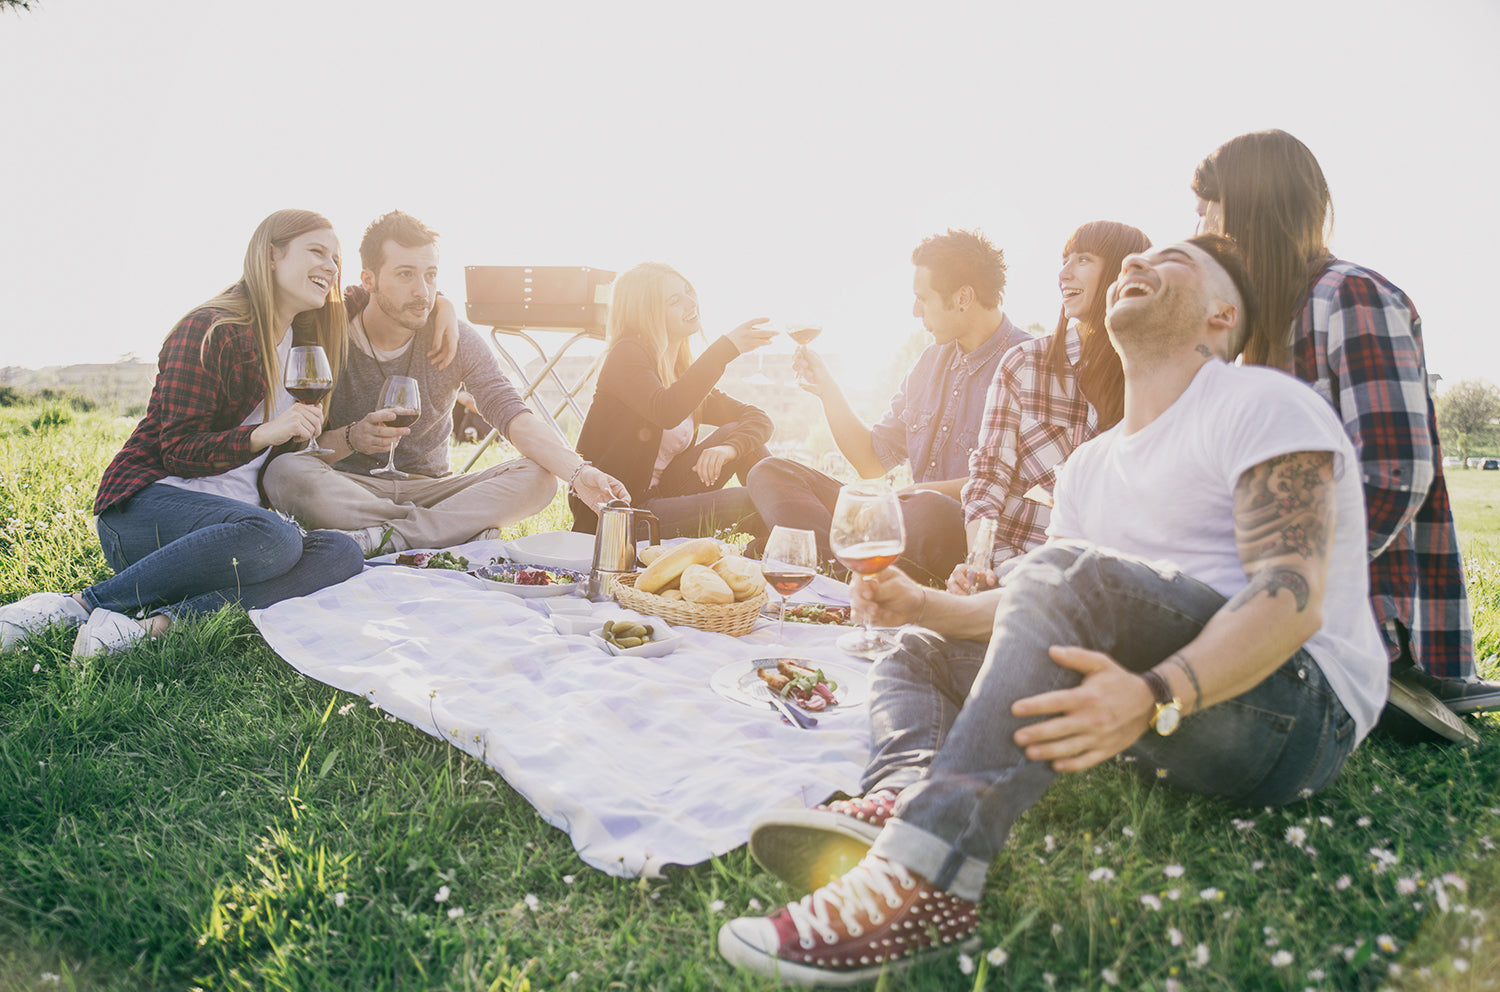 How to Plan For a Surprise Picnic Party